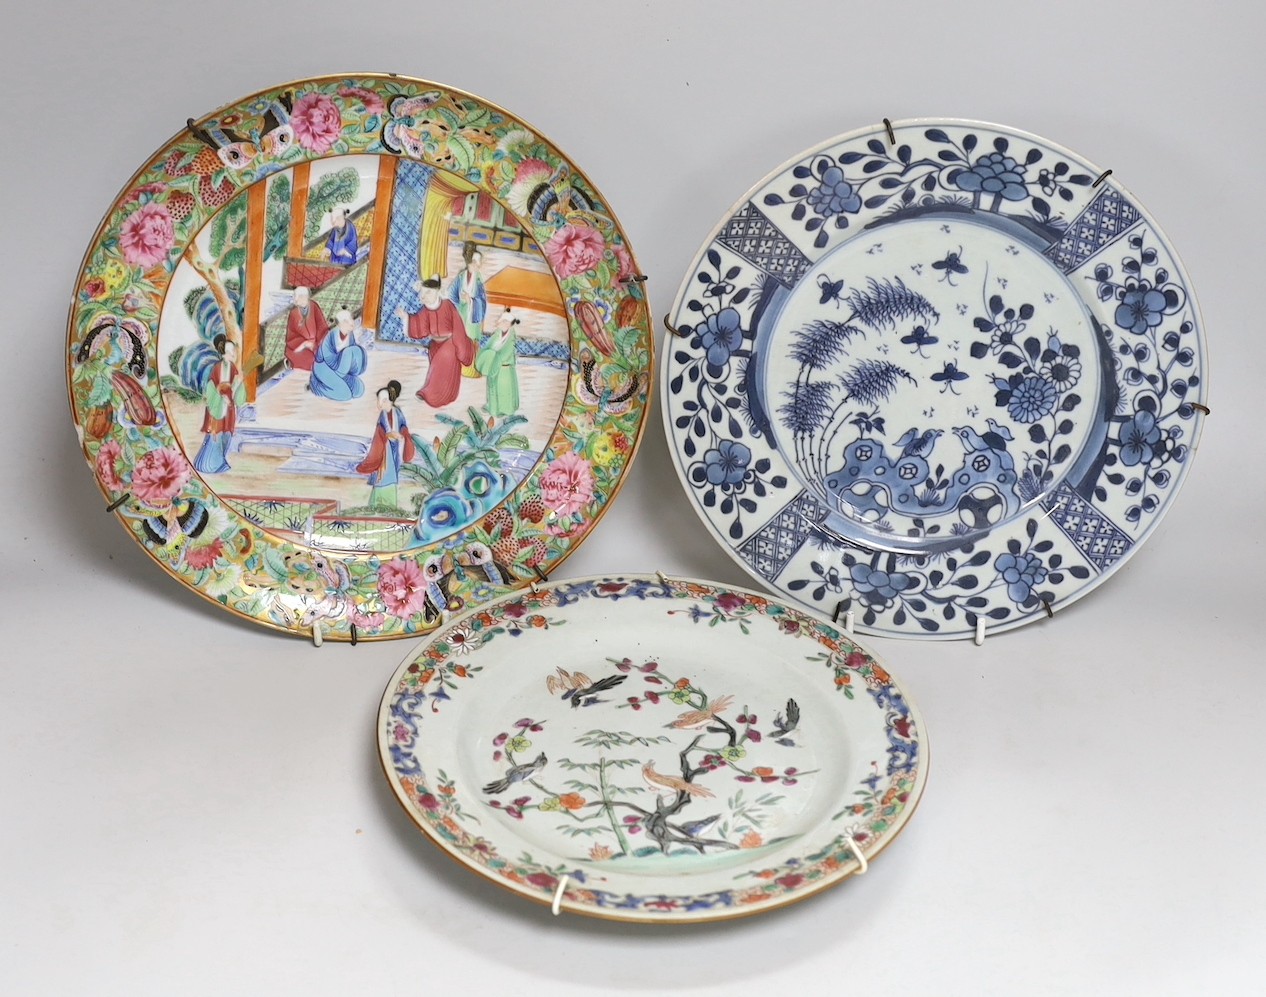 A 19th century Chinese enamelled porcelain dish, 25.4cm and to 18th century Chinese exports